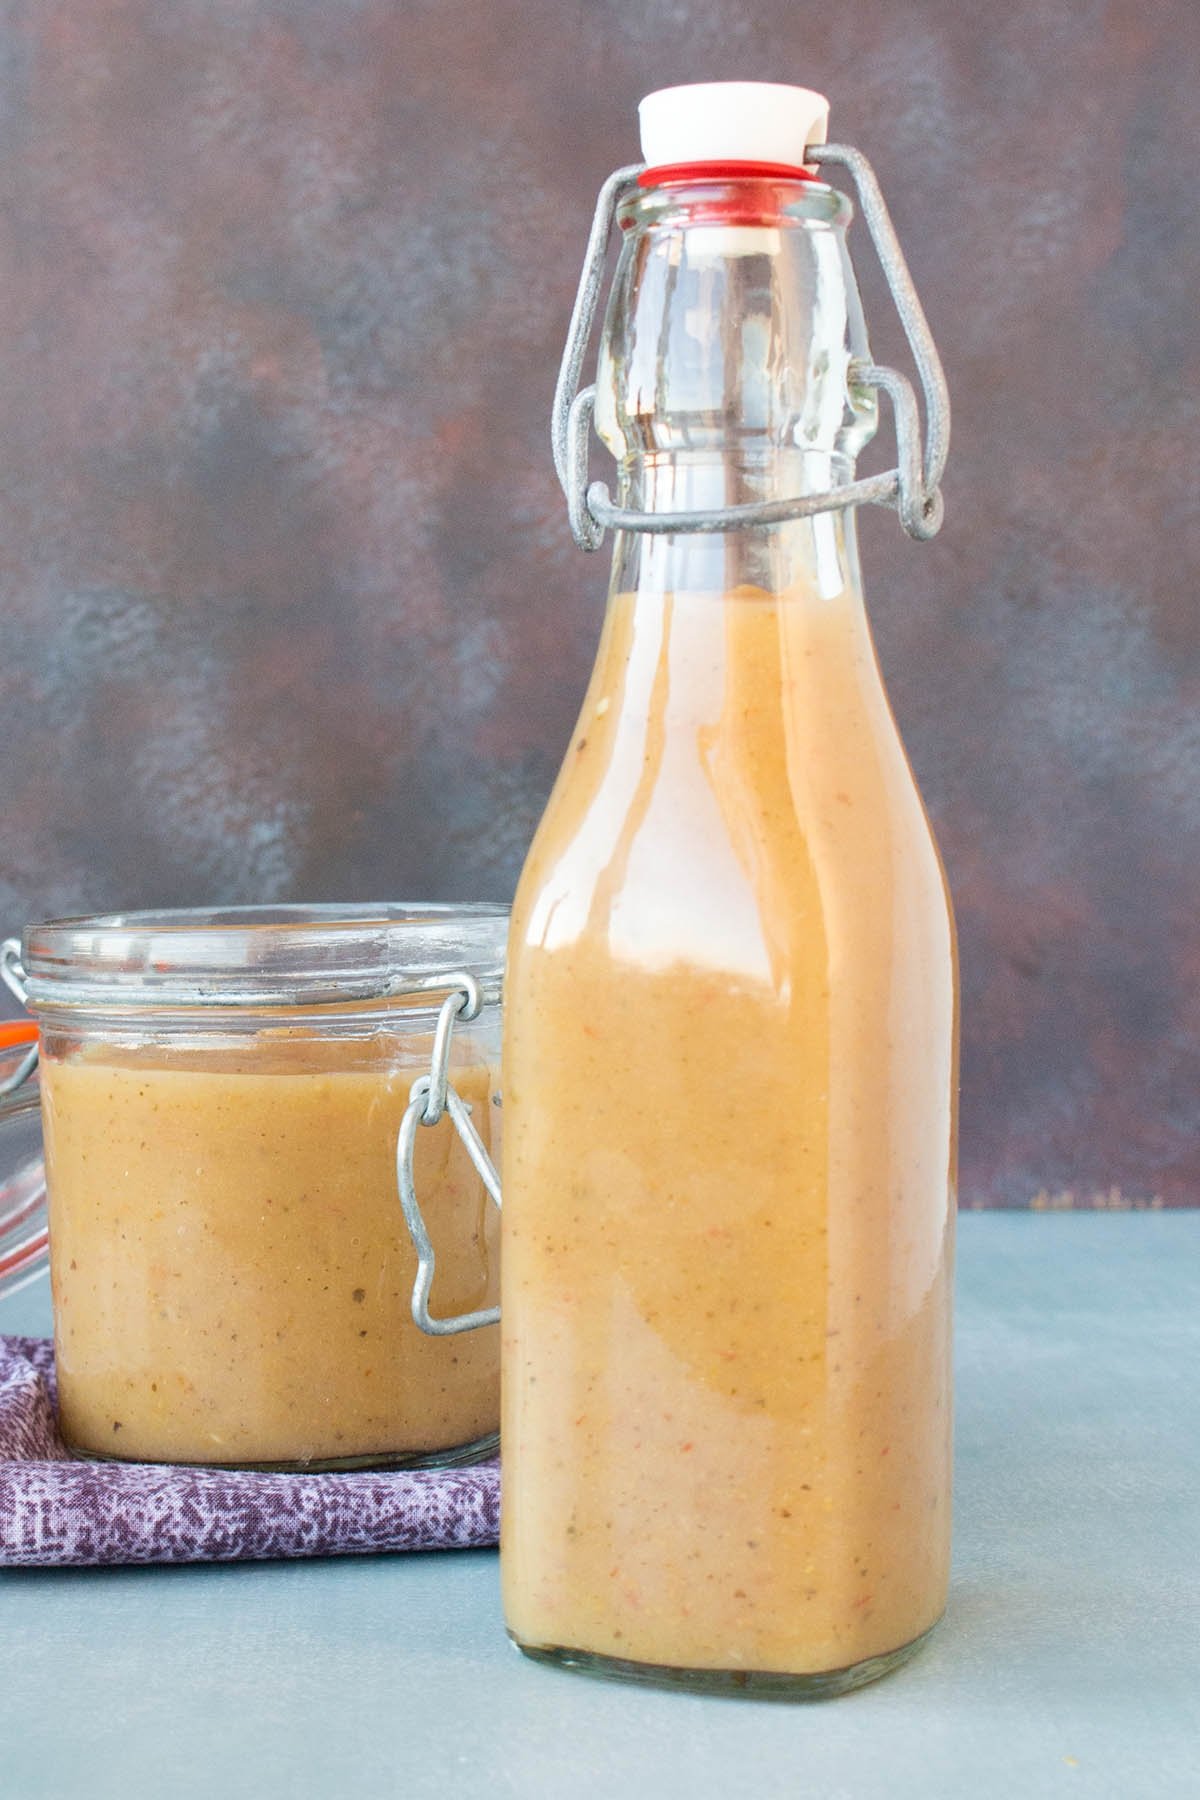 Sweet Ghost Pepper-Pineapple-Pear Hot Sauce ready